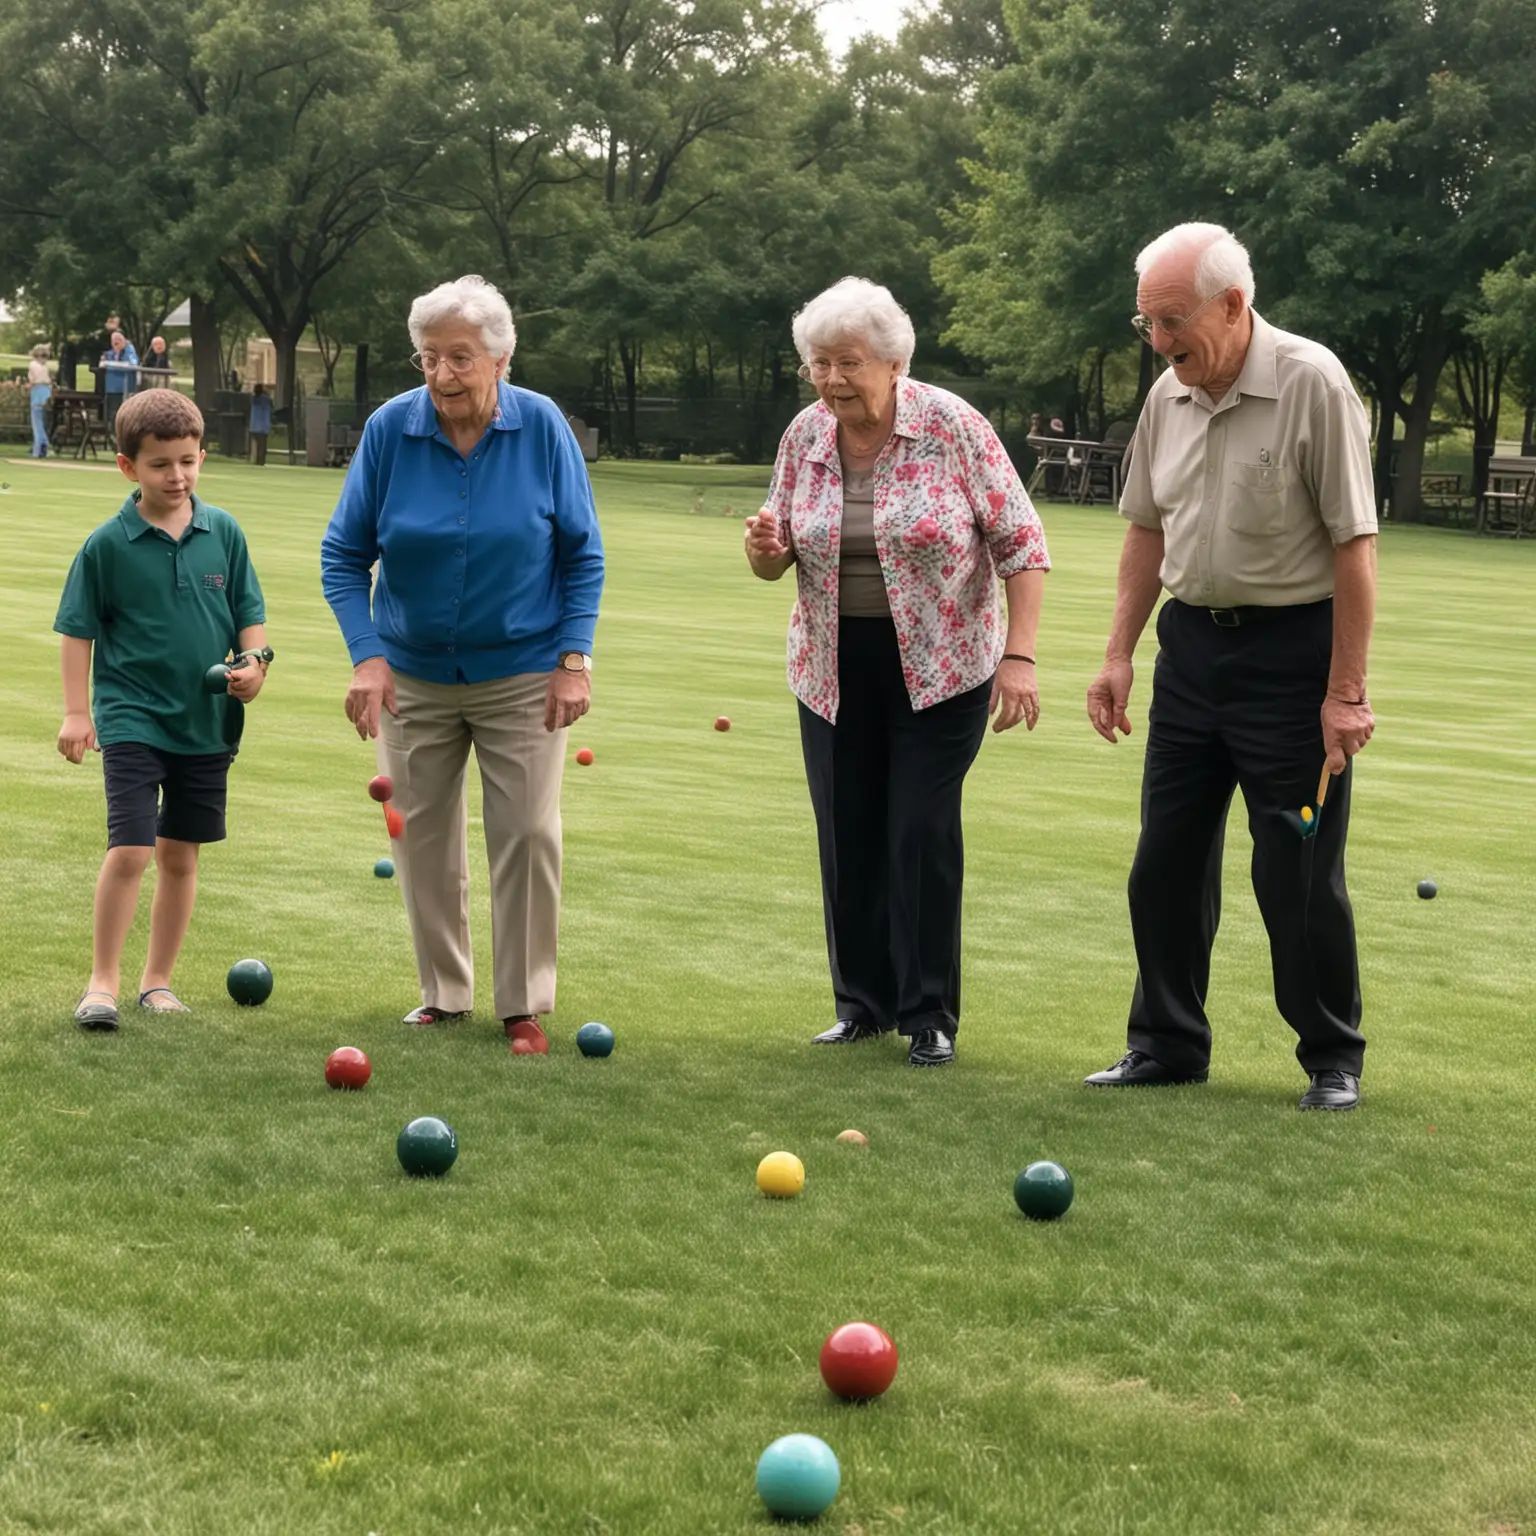 Intergenerational Fun Grandparents and Kids Enjoying Bocce Together